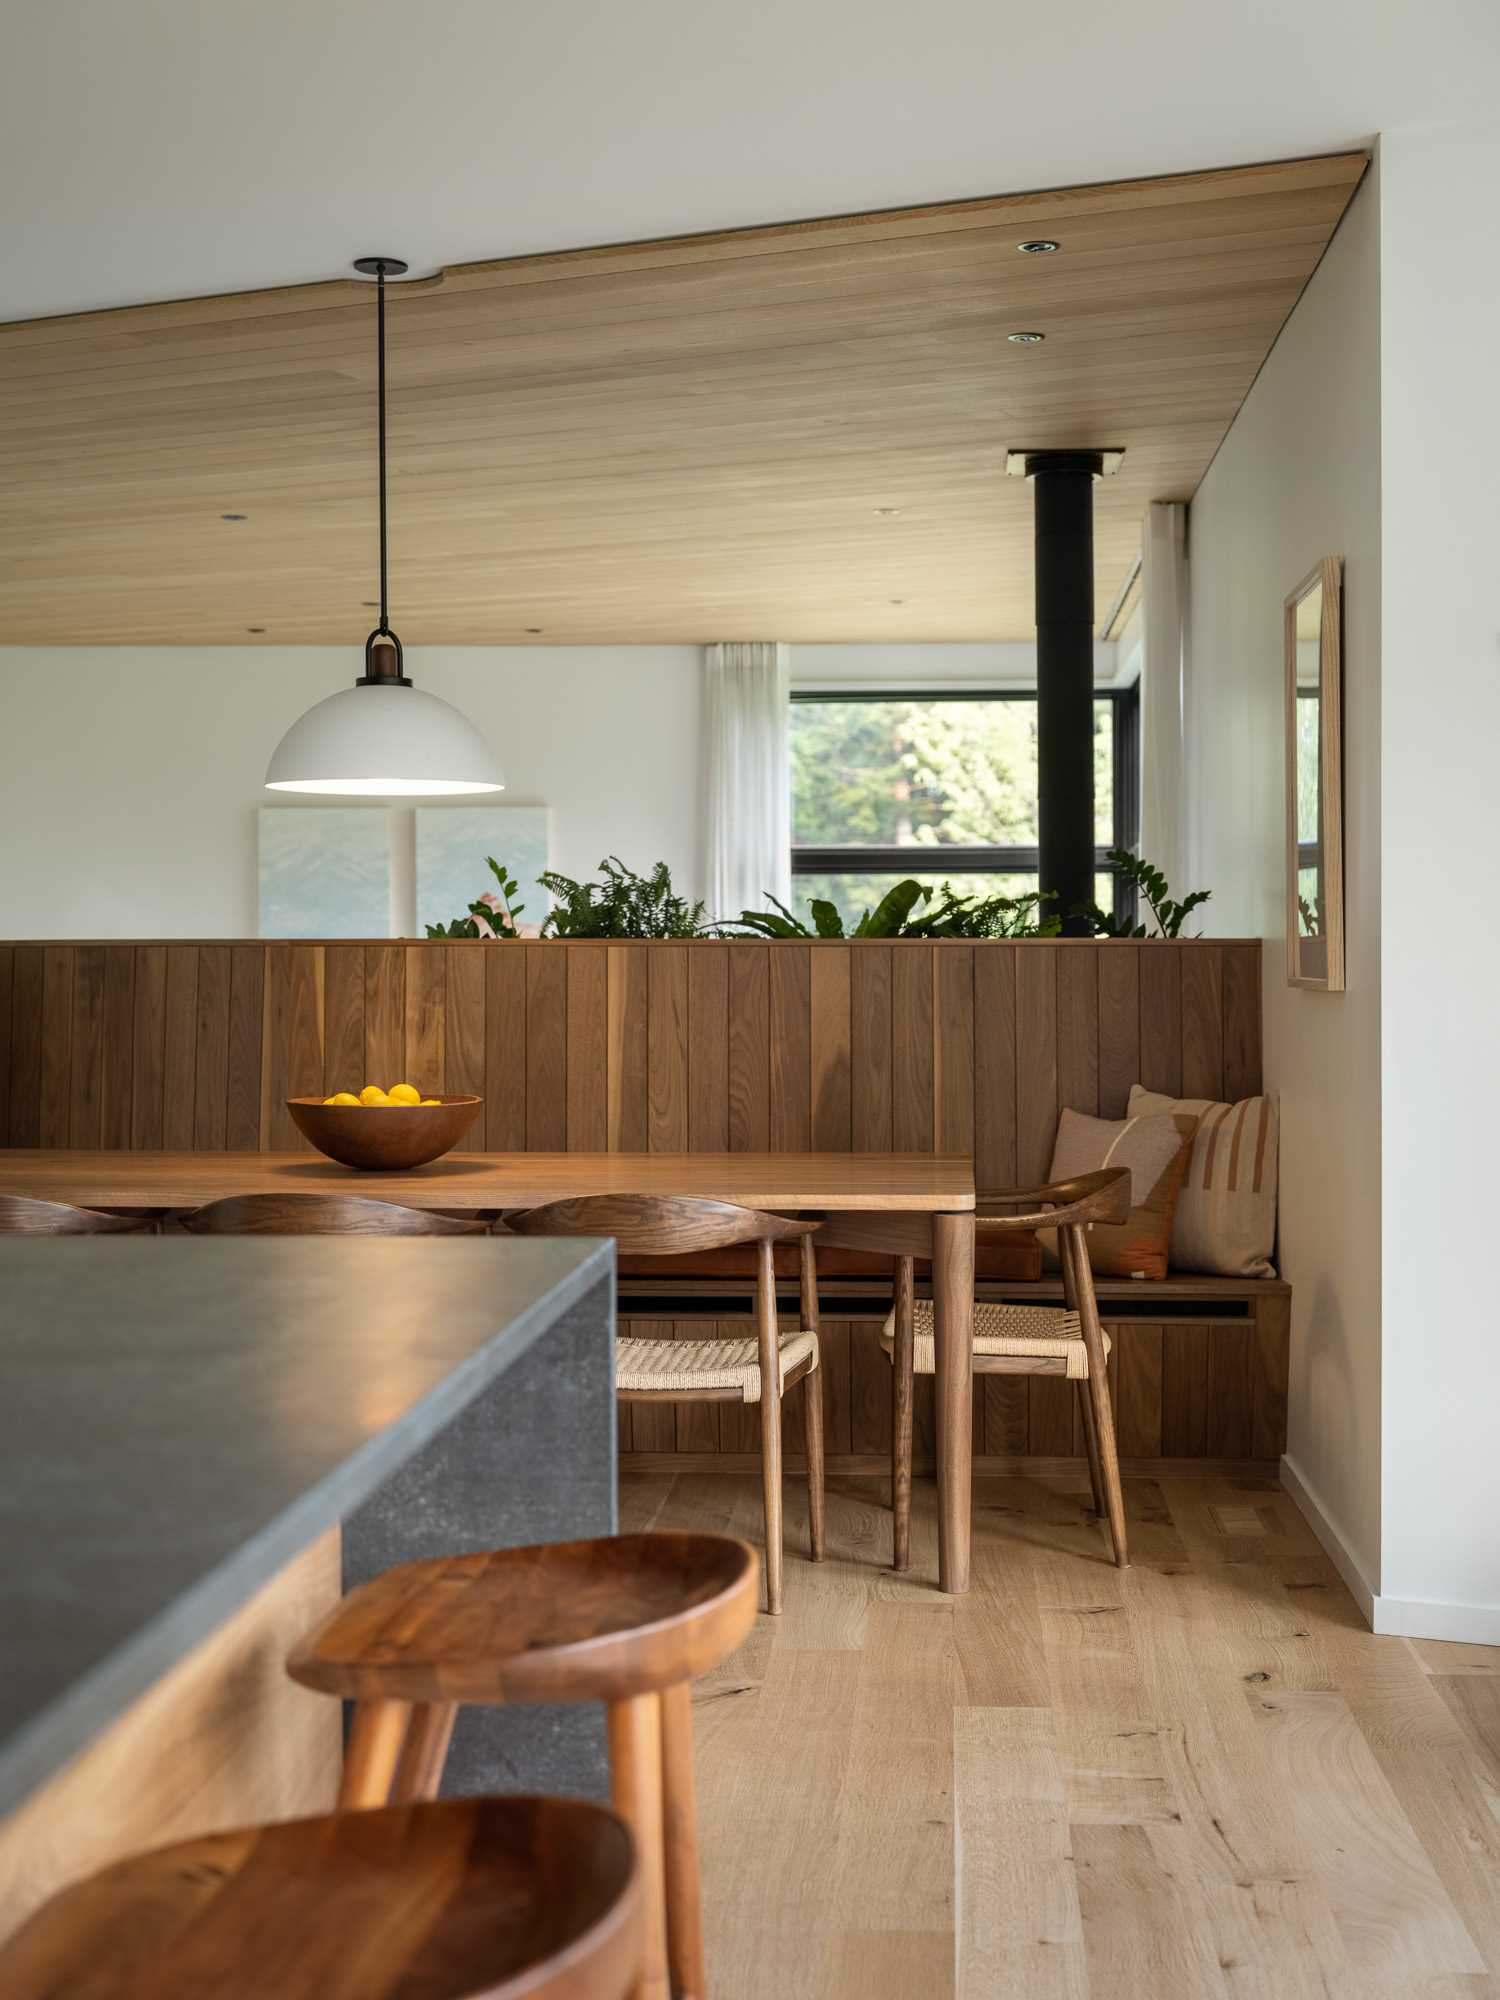 The dining room has a unique design, with a sculptural wood banquette bench that acts as seating for the table.